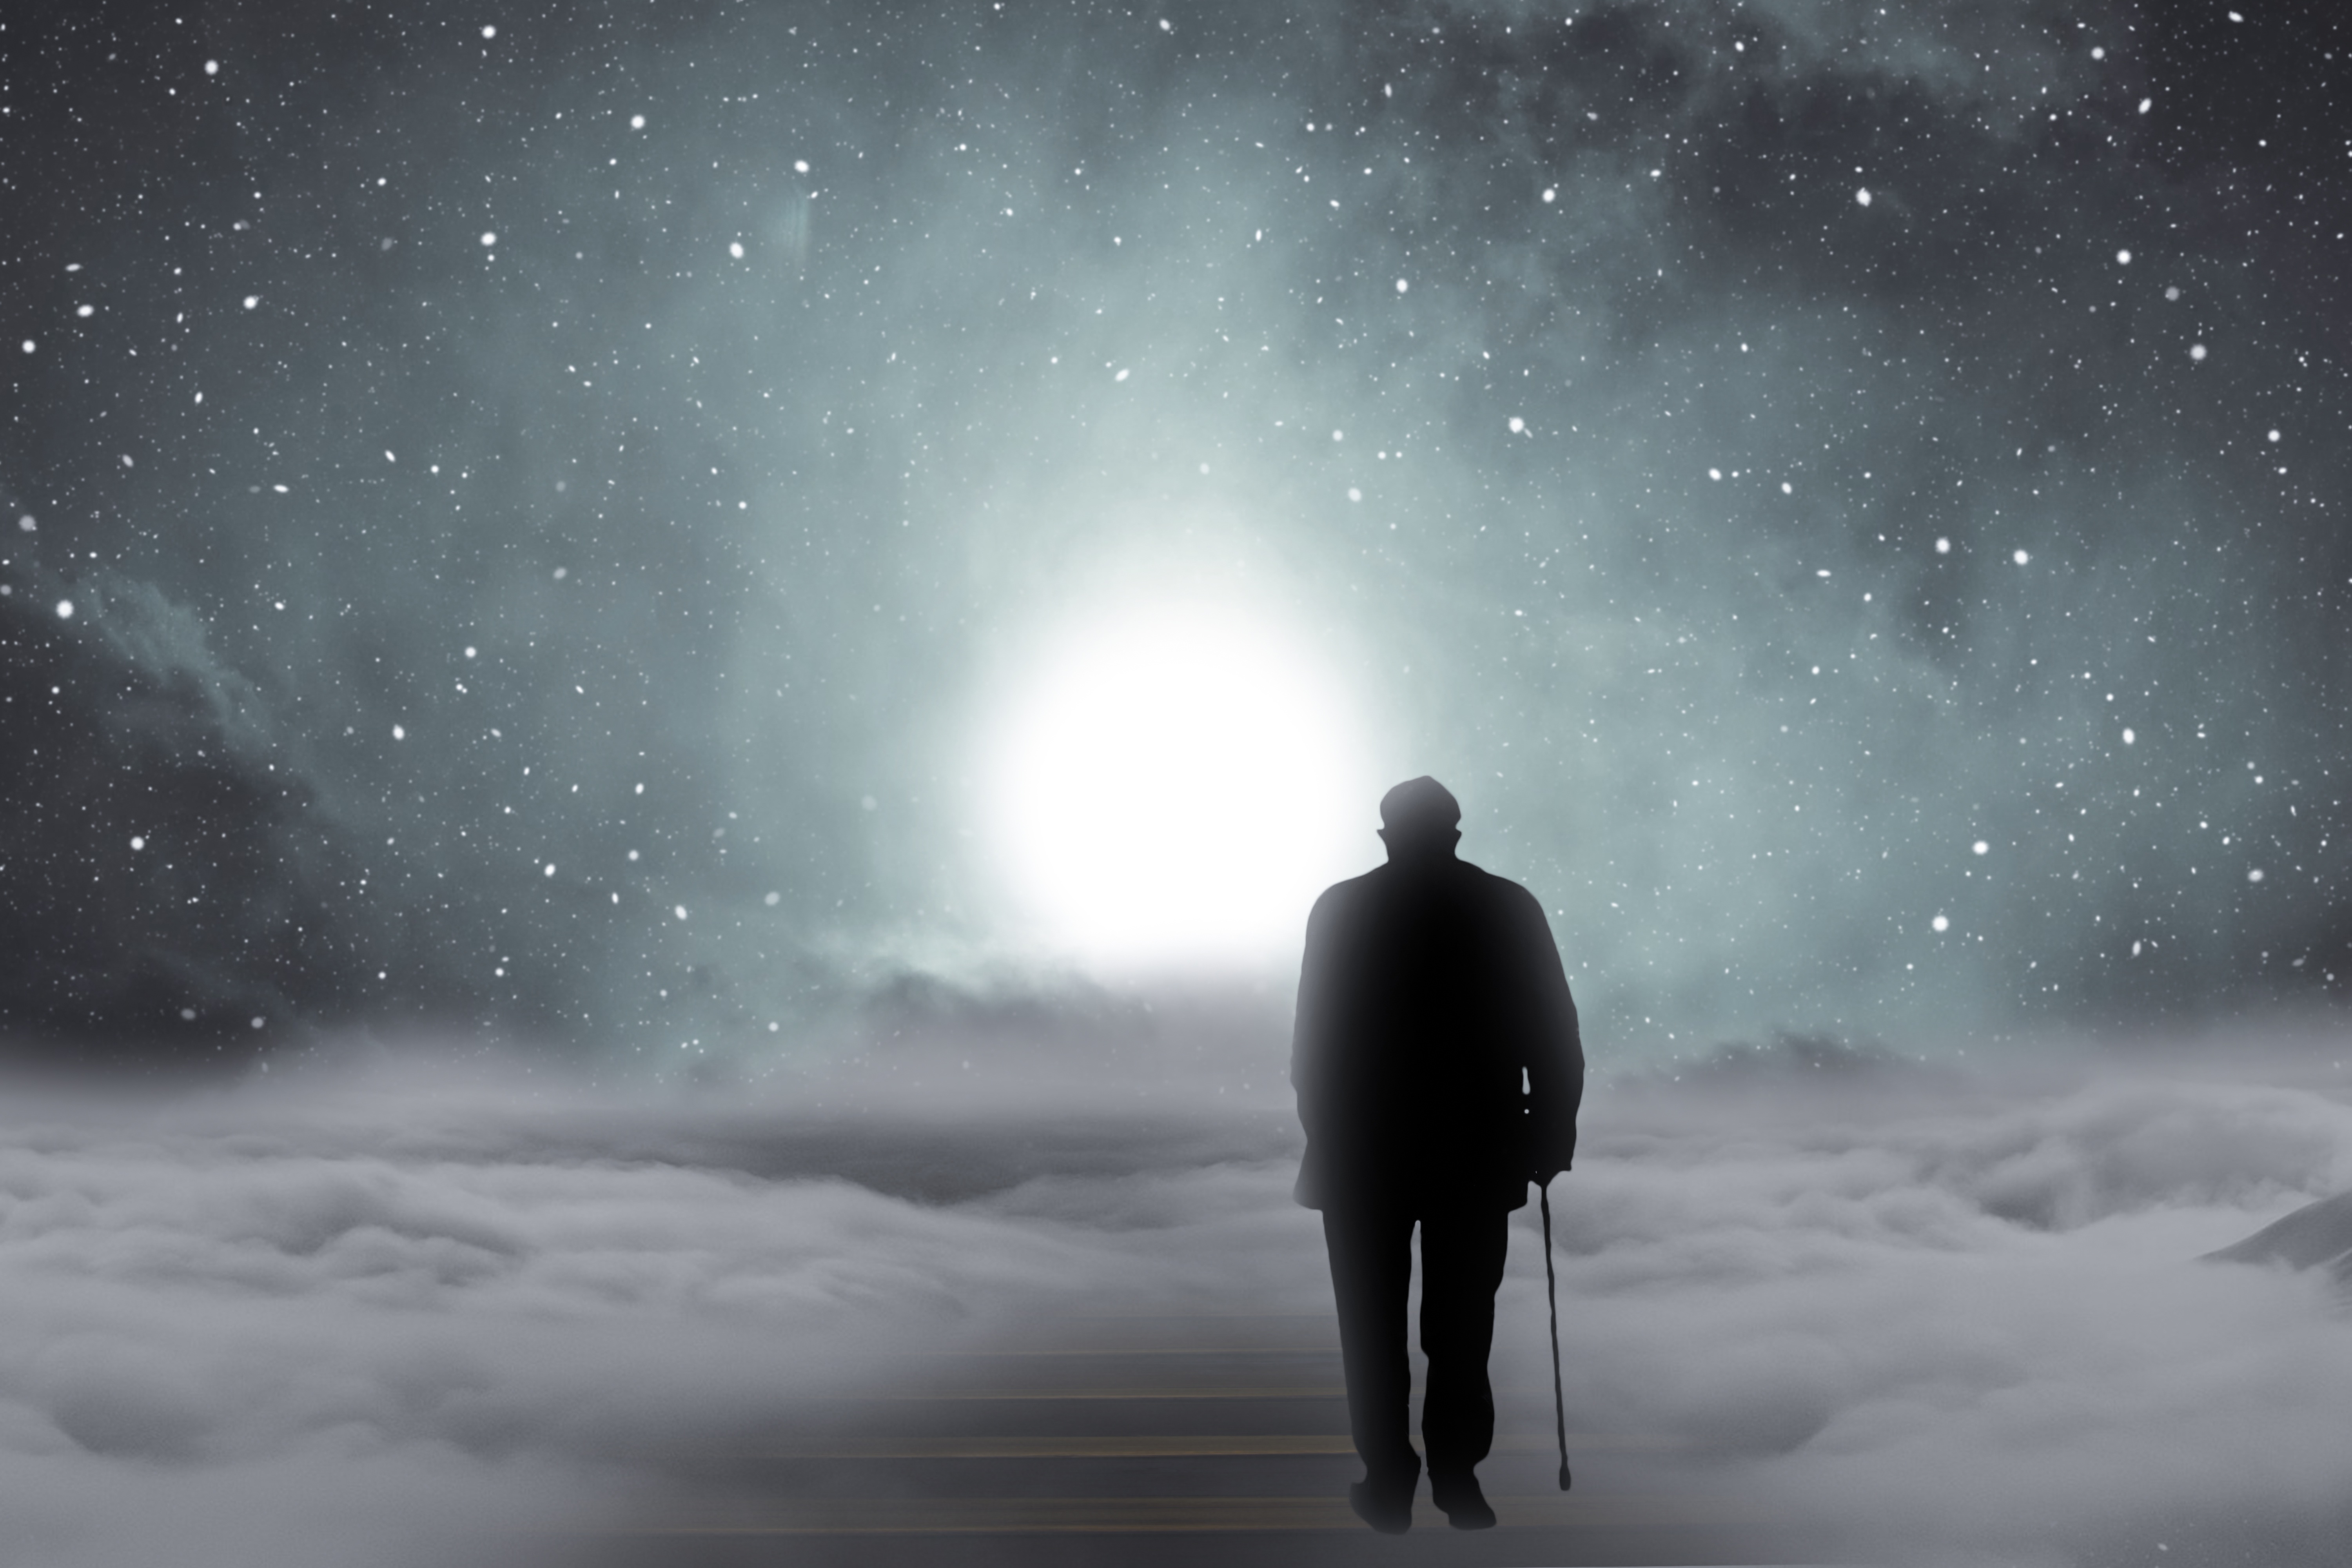 silhouette of back of old man with cane walking among the clouds starry night bright moon, hues blueish green gray